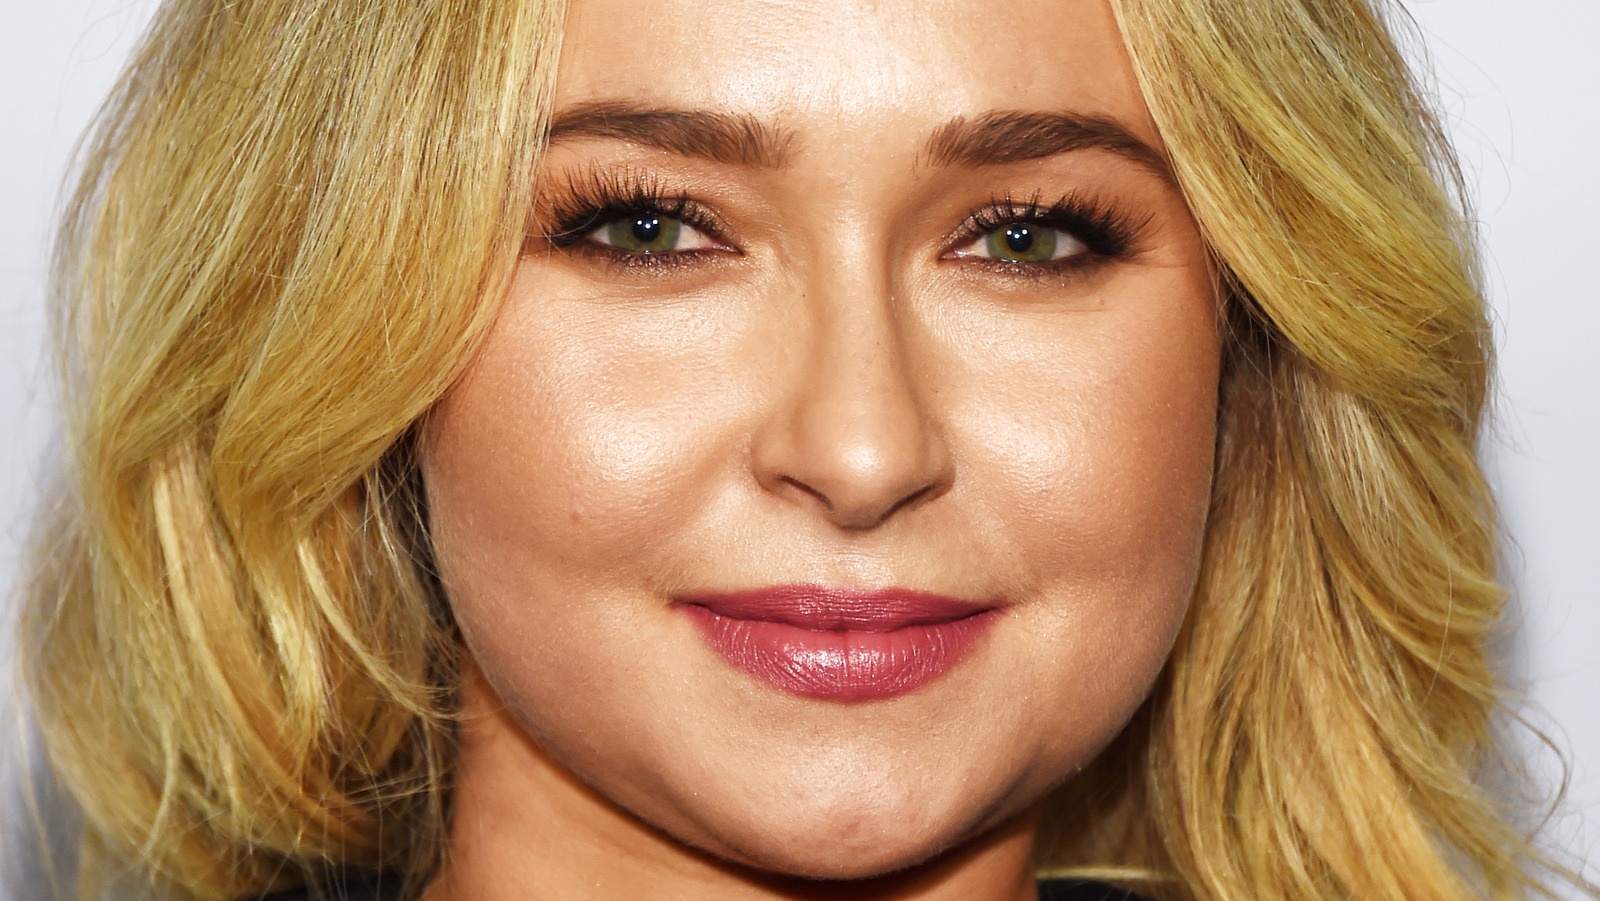 Hayden Panettiere Opens Up About A Secret Years-Long Addiction